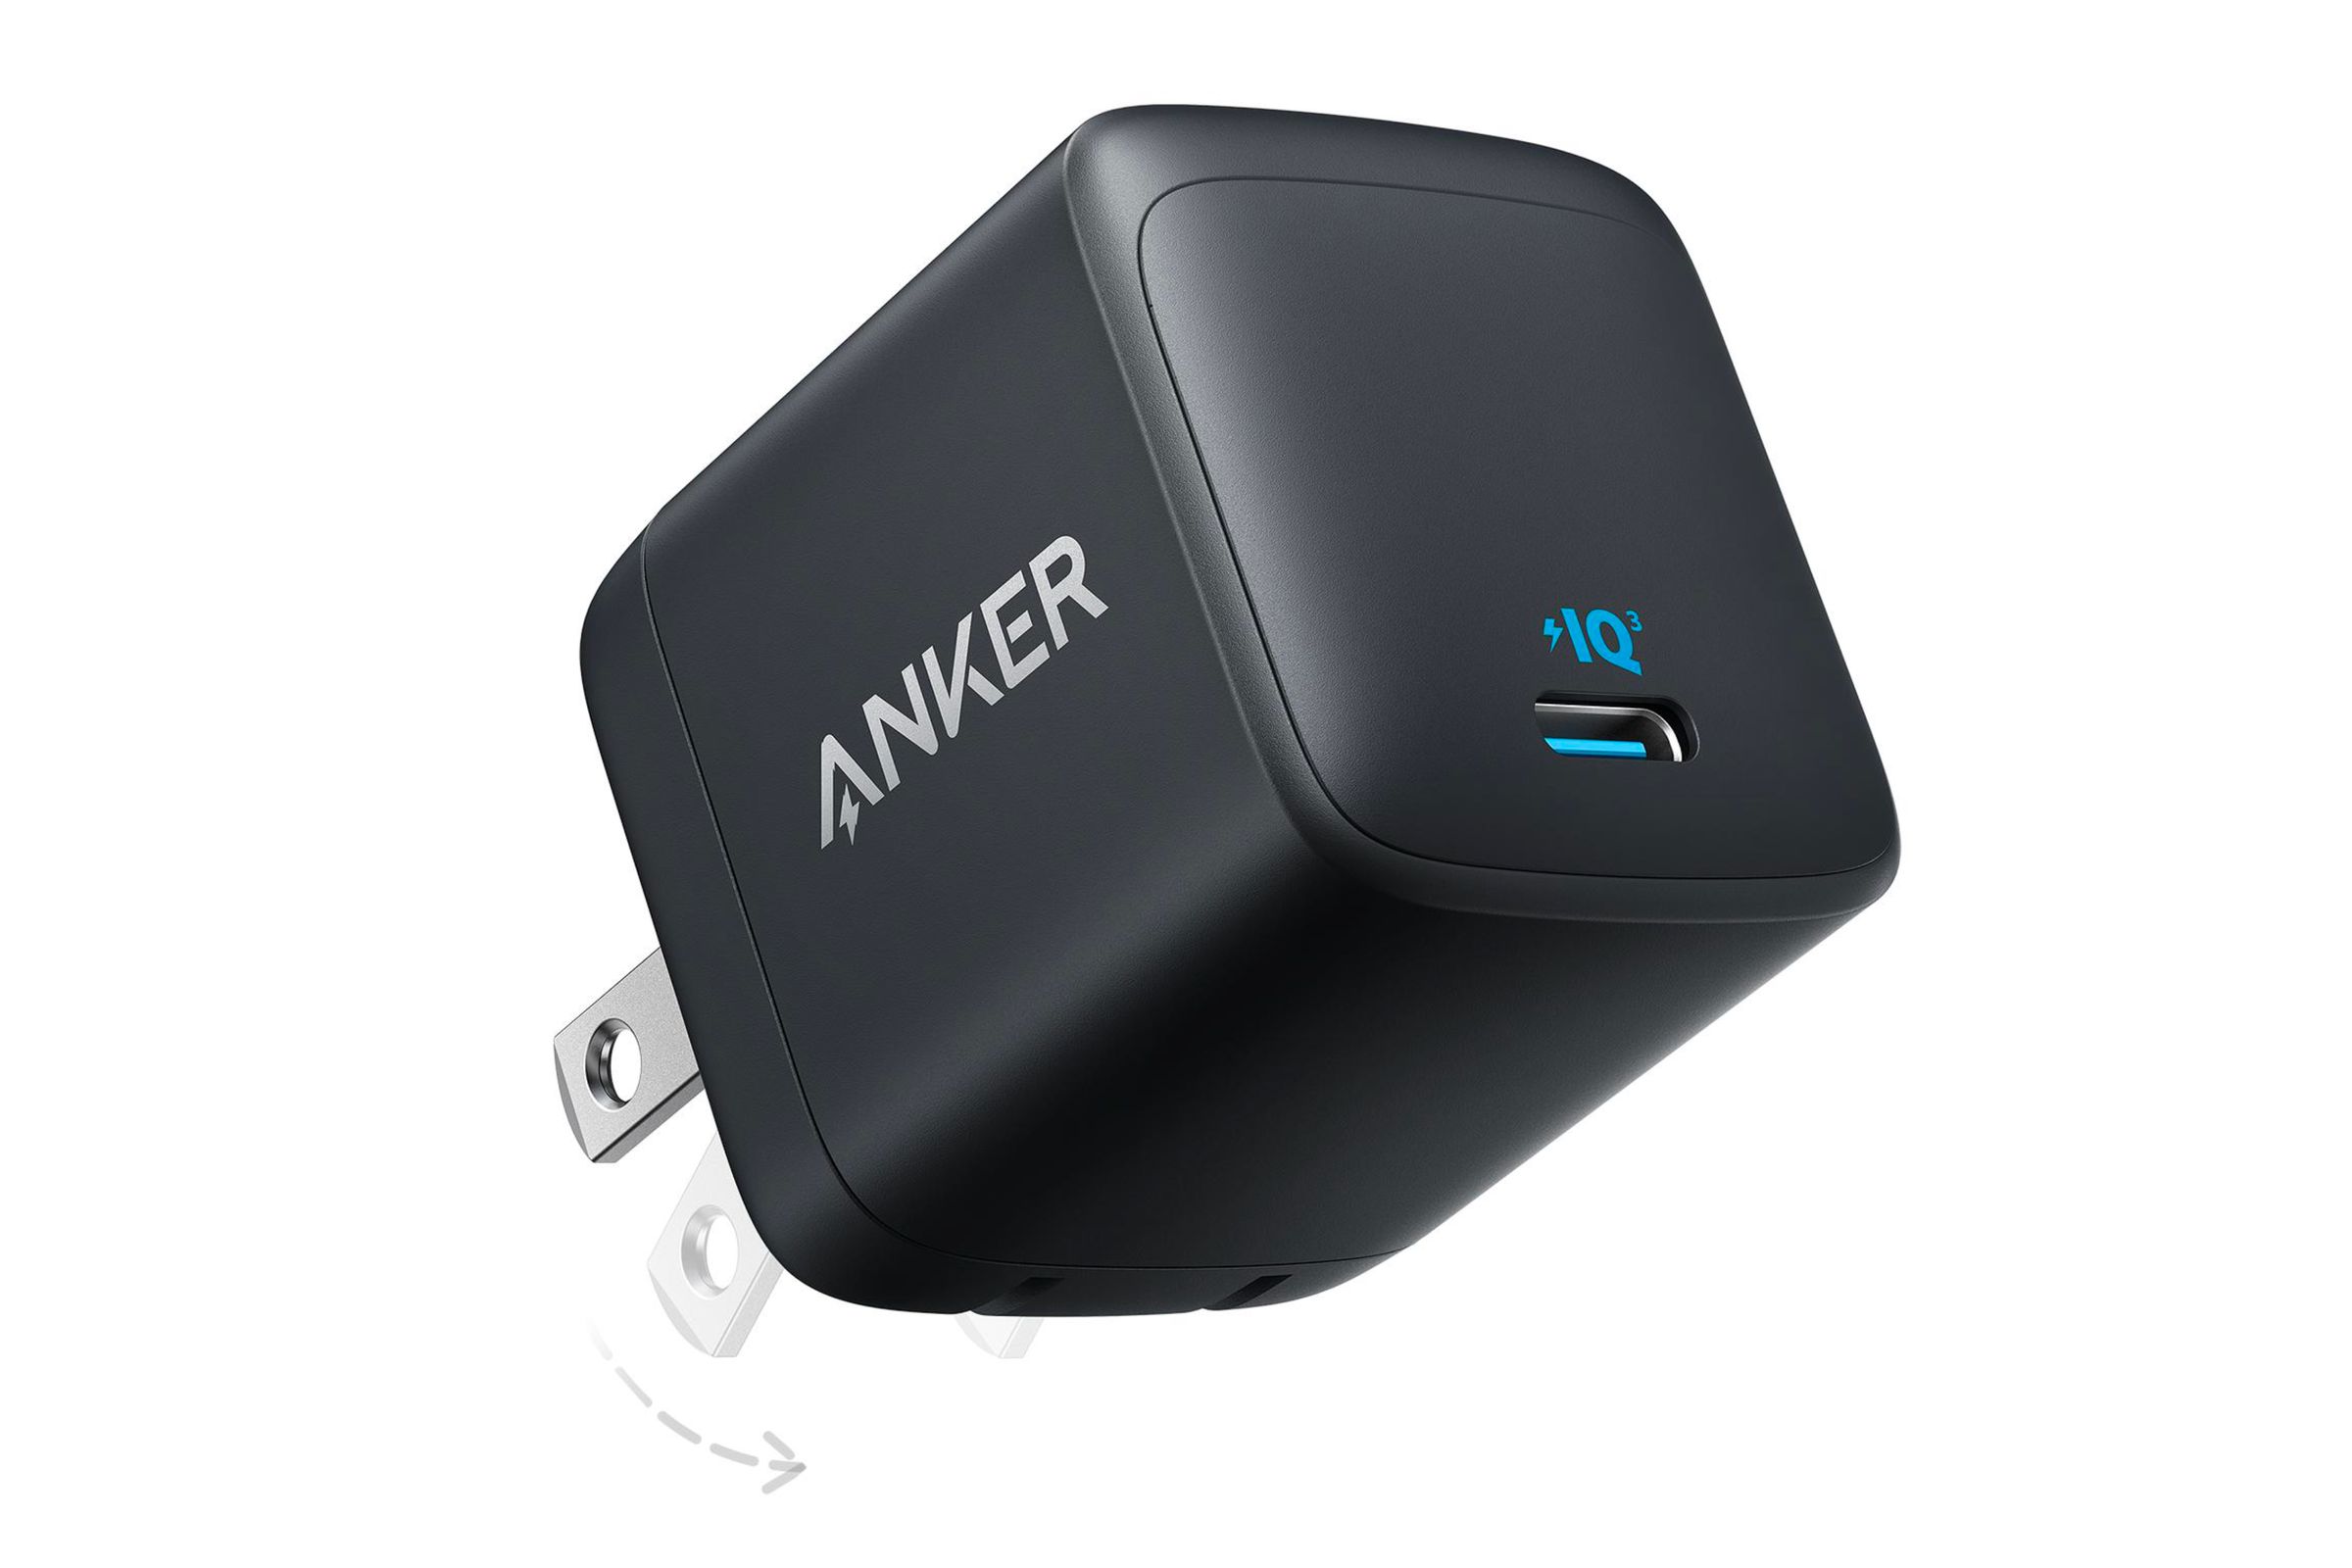 A black cube charger with the AC power blades flipping out, and Anker logo on the side, and a single USB-C port with a blue IQ3 logo above it.